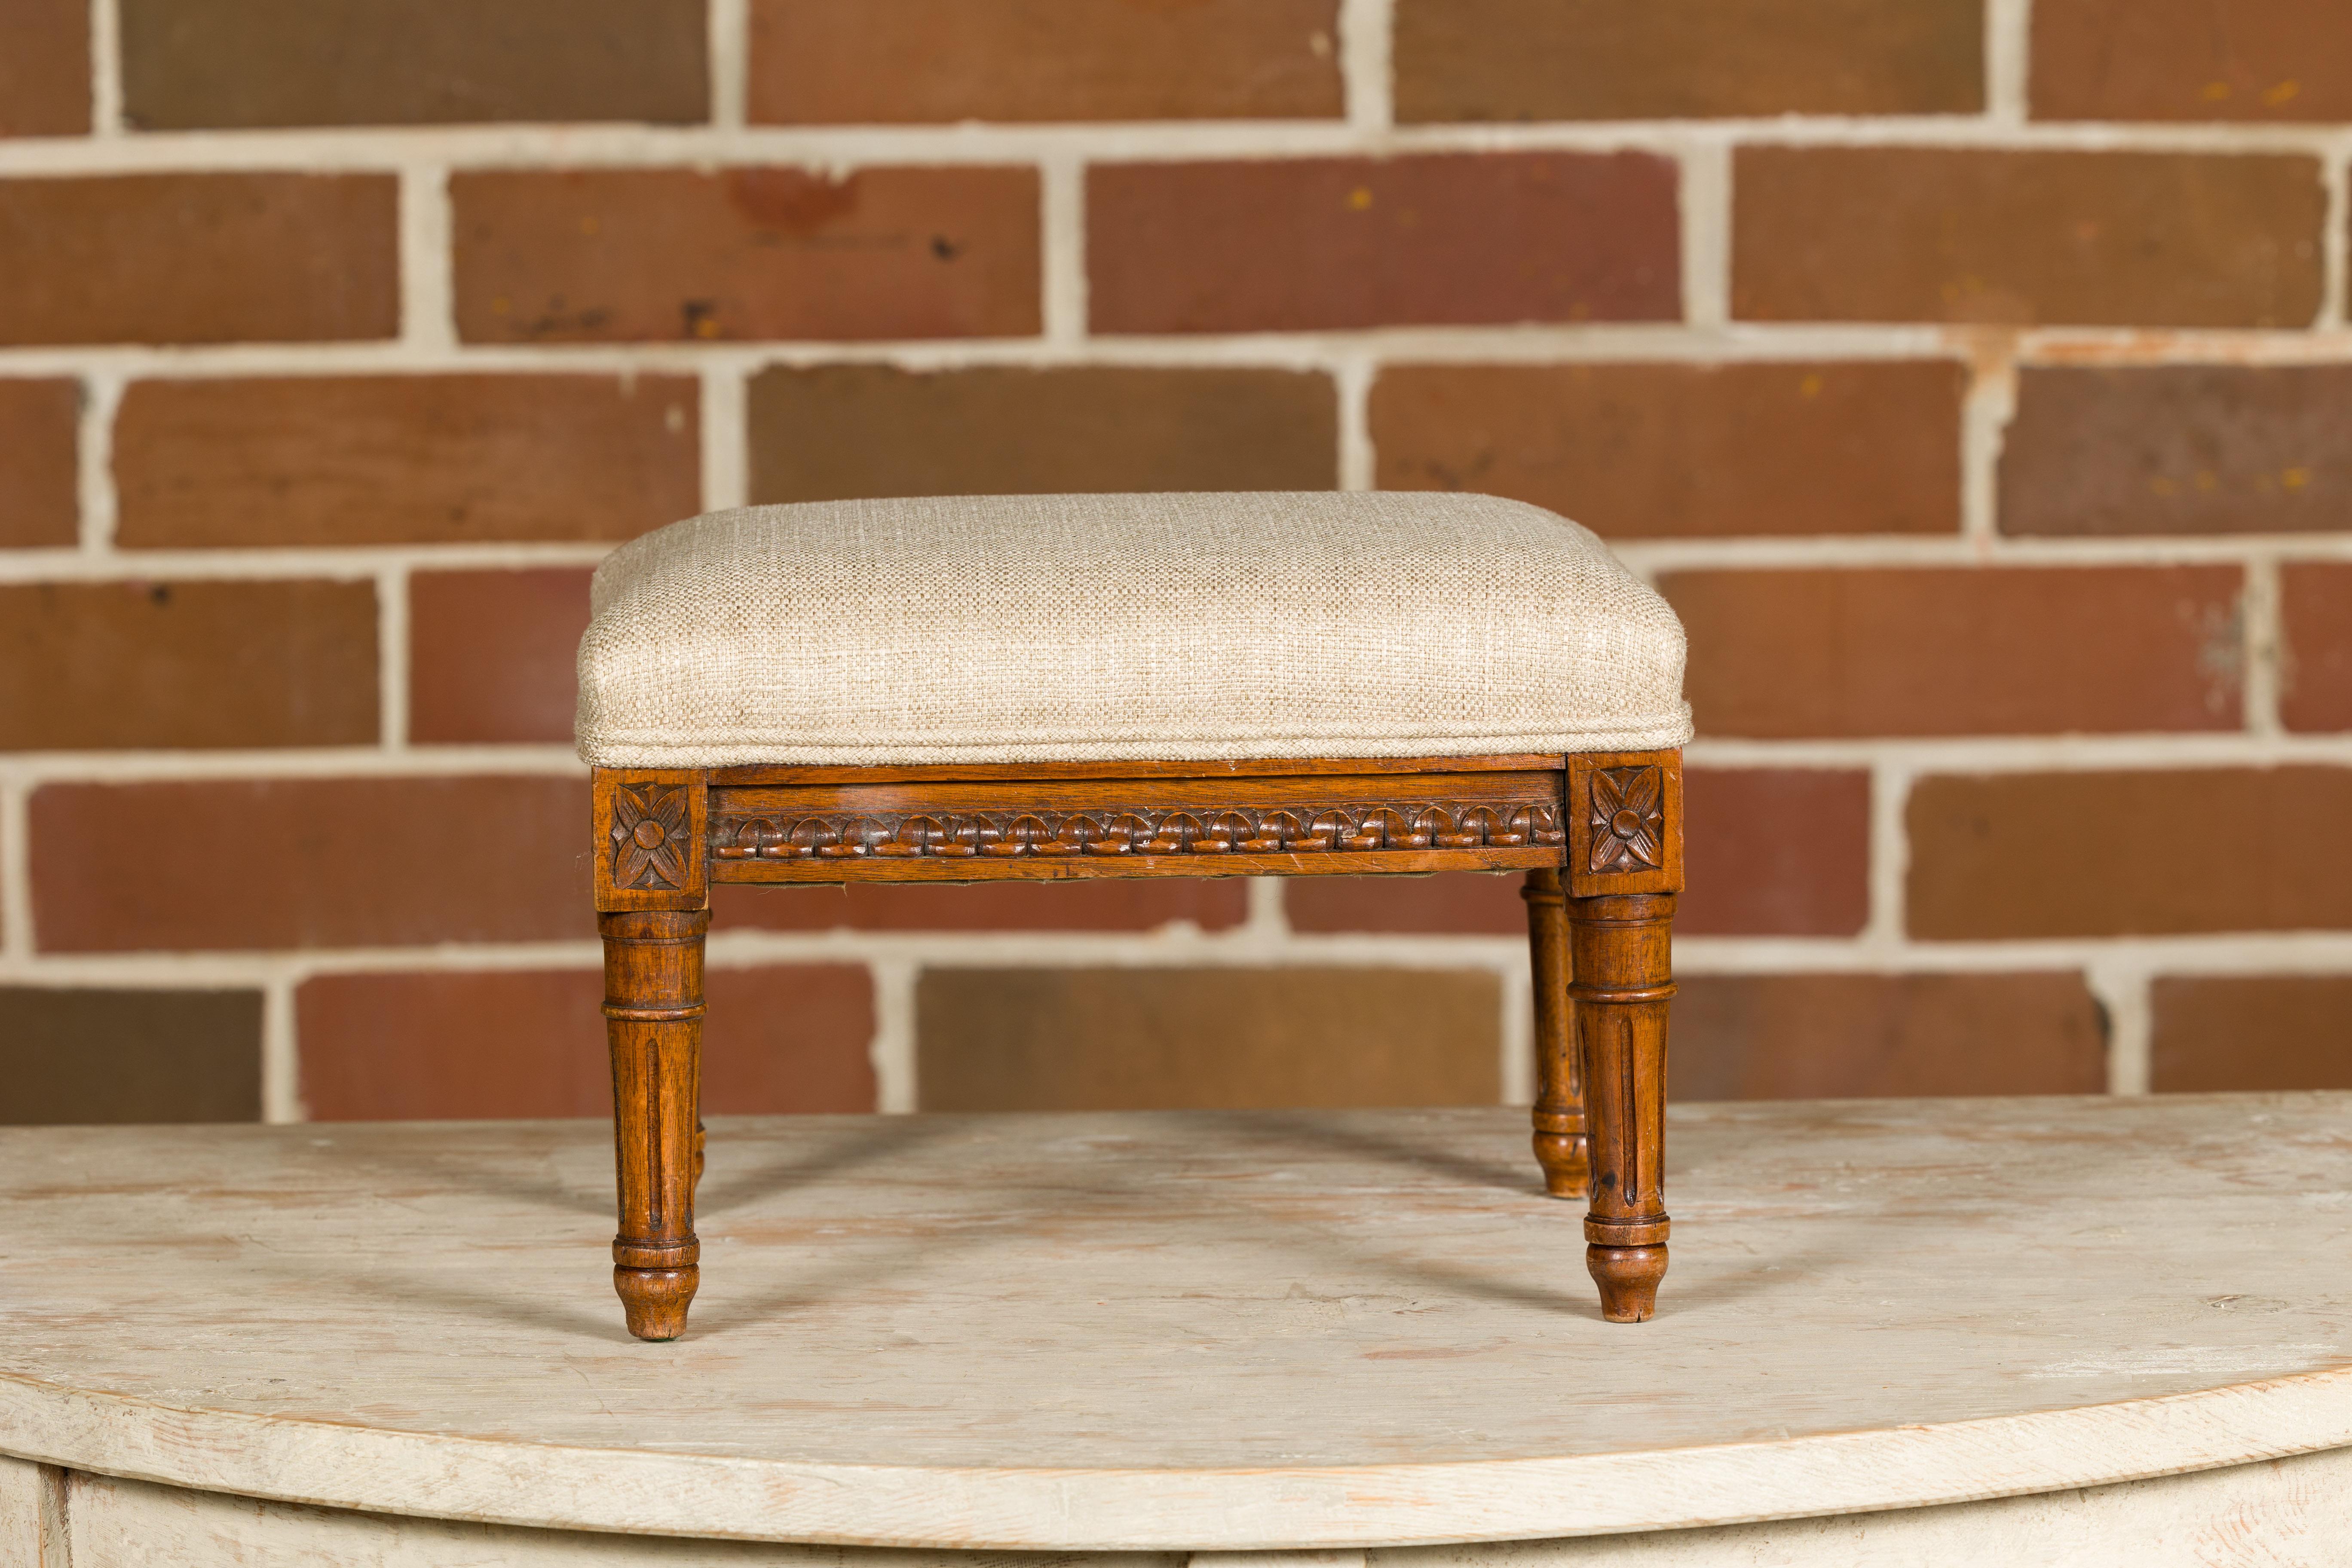 A French Louis XVI style footstool from circa 1900 with carved rais-de-cœur and rosettes motifs on the apron, fluted legs and custom upholstery. This charming French Louis XVI style footstool, dating from around 1900, is a representation of the